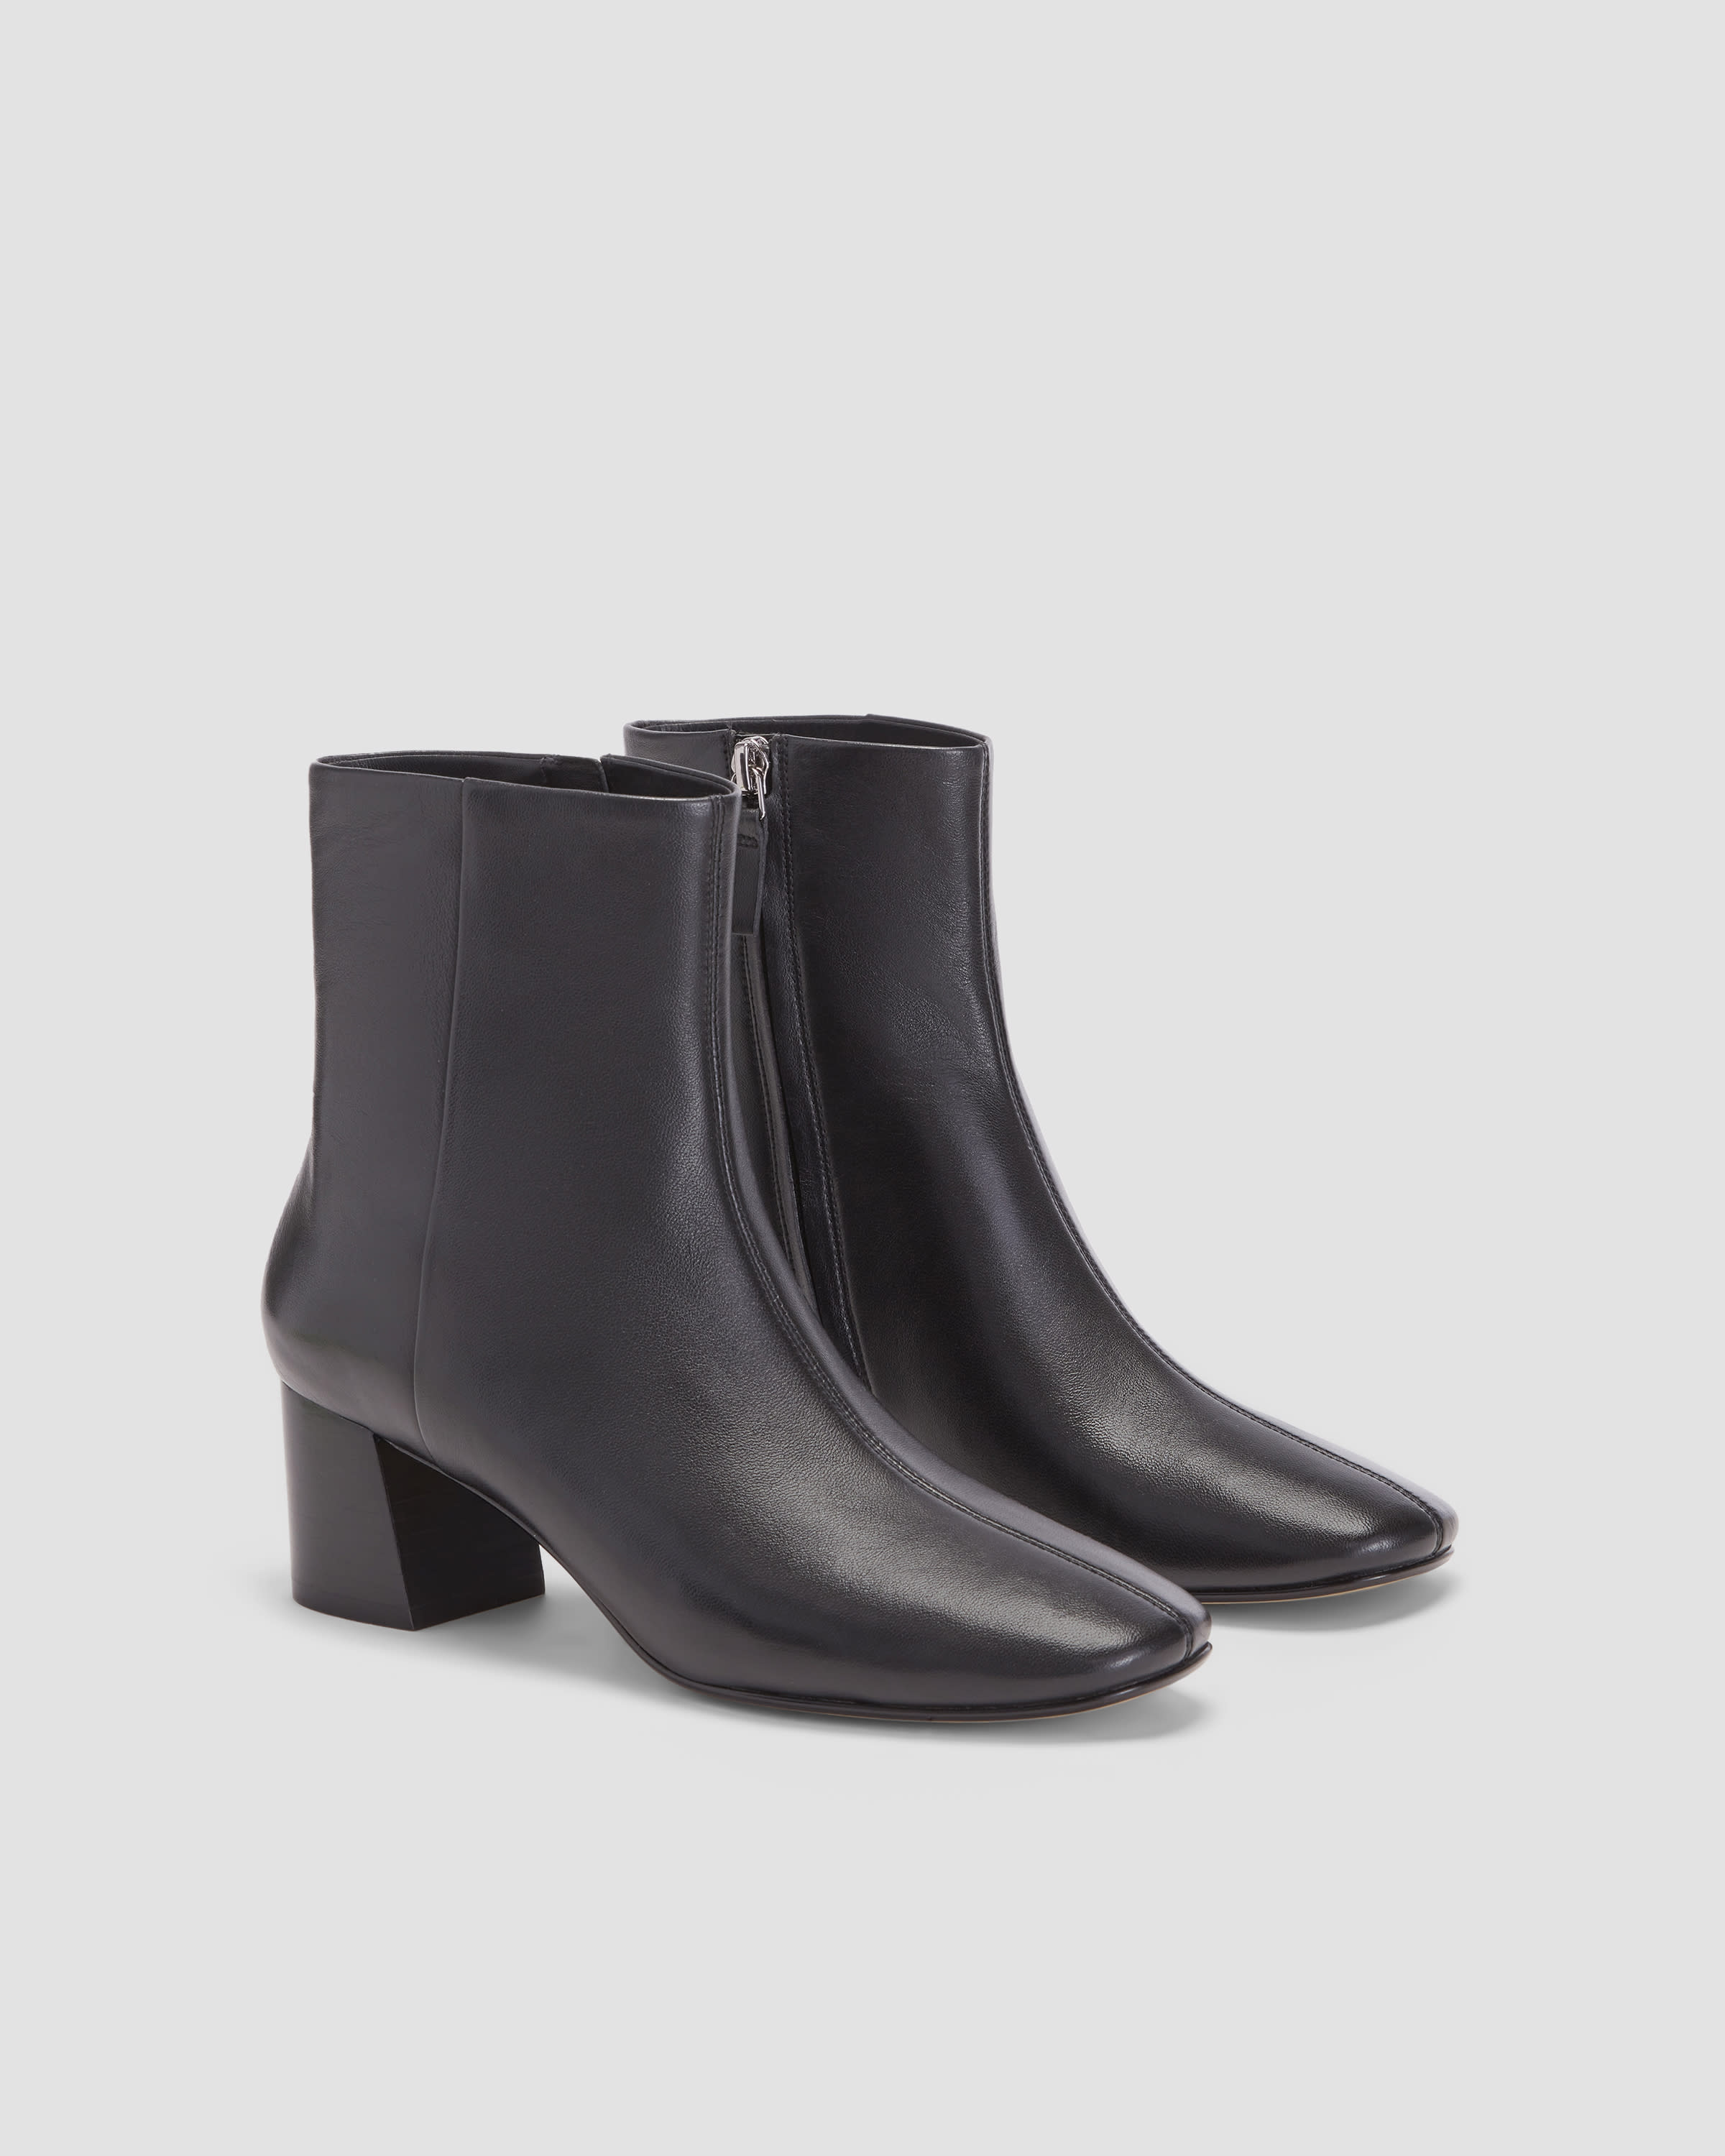 Everlane Day Boot Review & Preppy Outfit, Kelly in the City